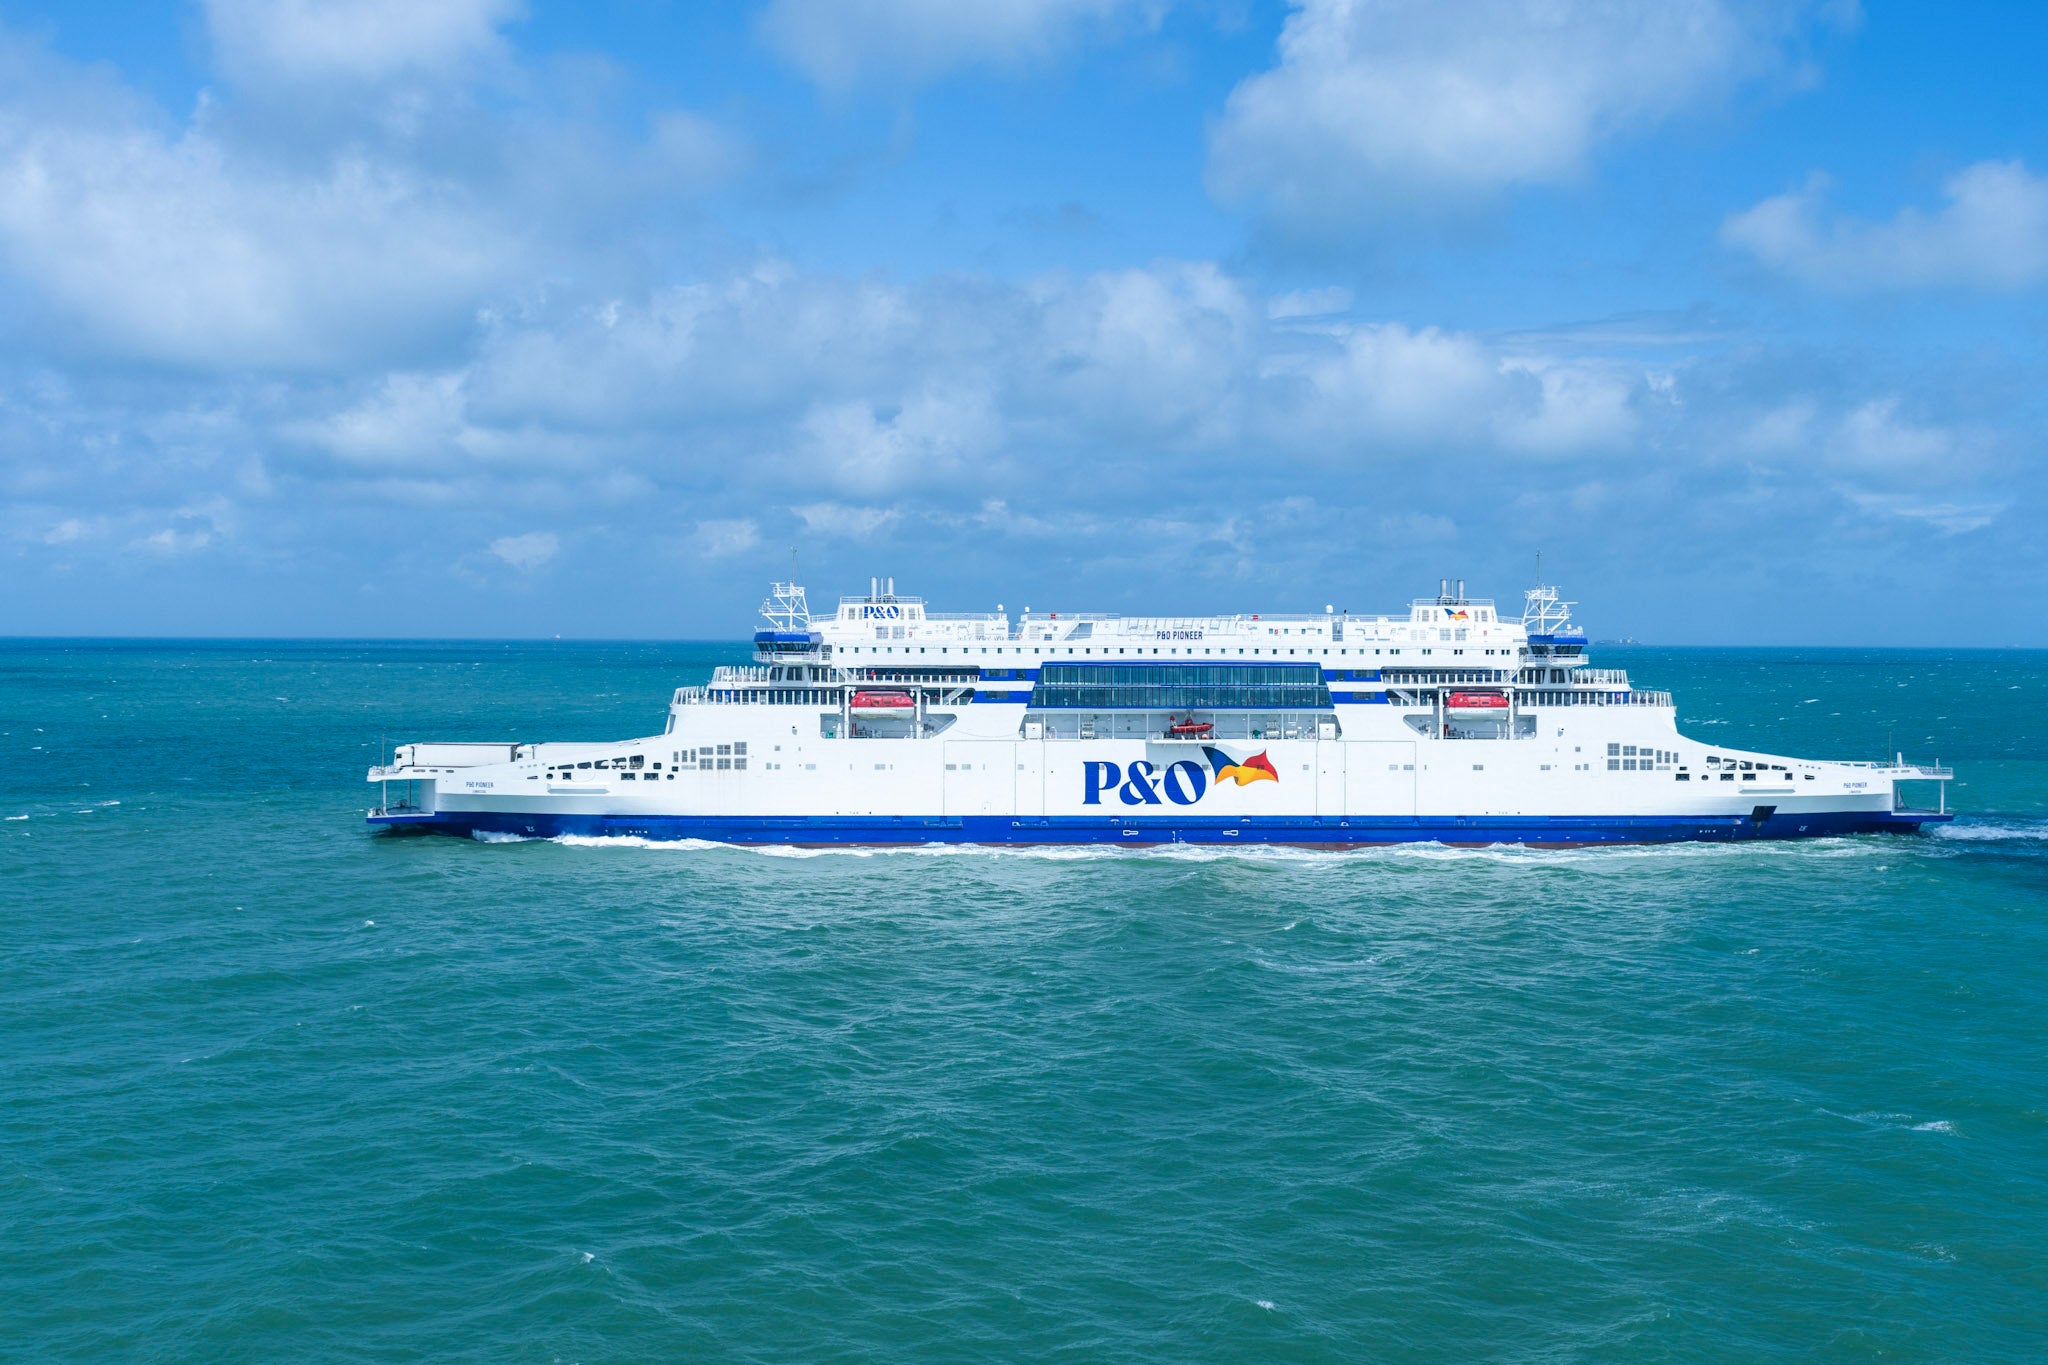 Save 20 per cent on journeys across the Channel with P&O Ferries this November